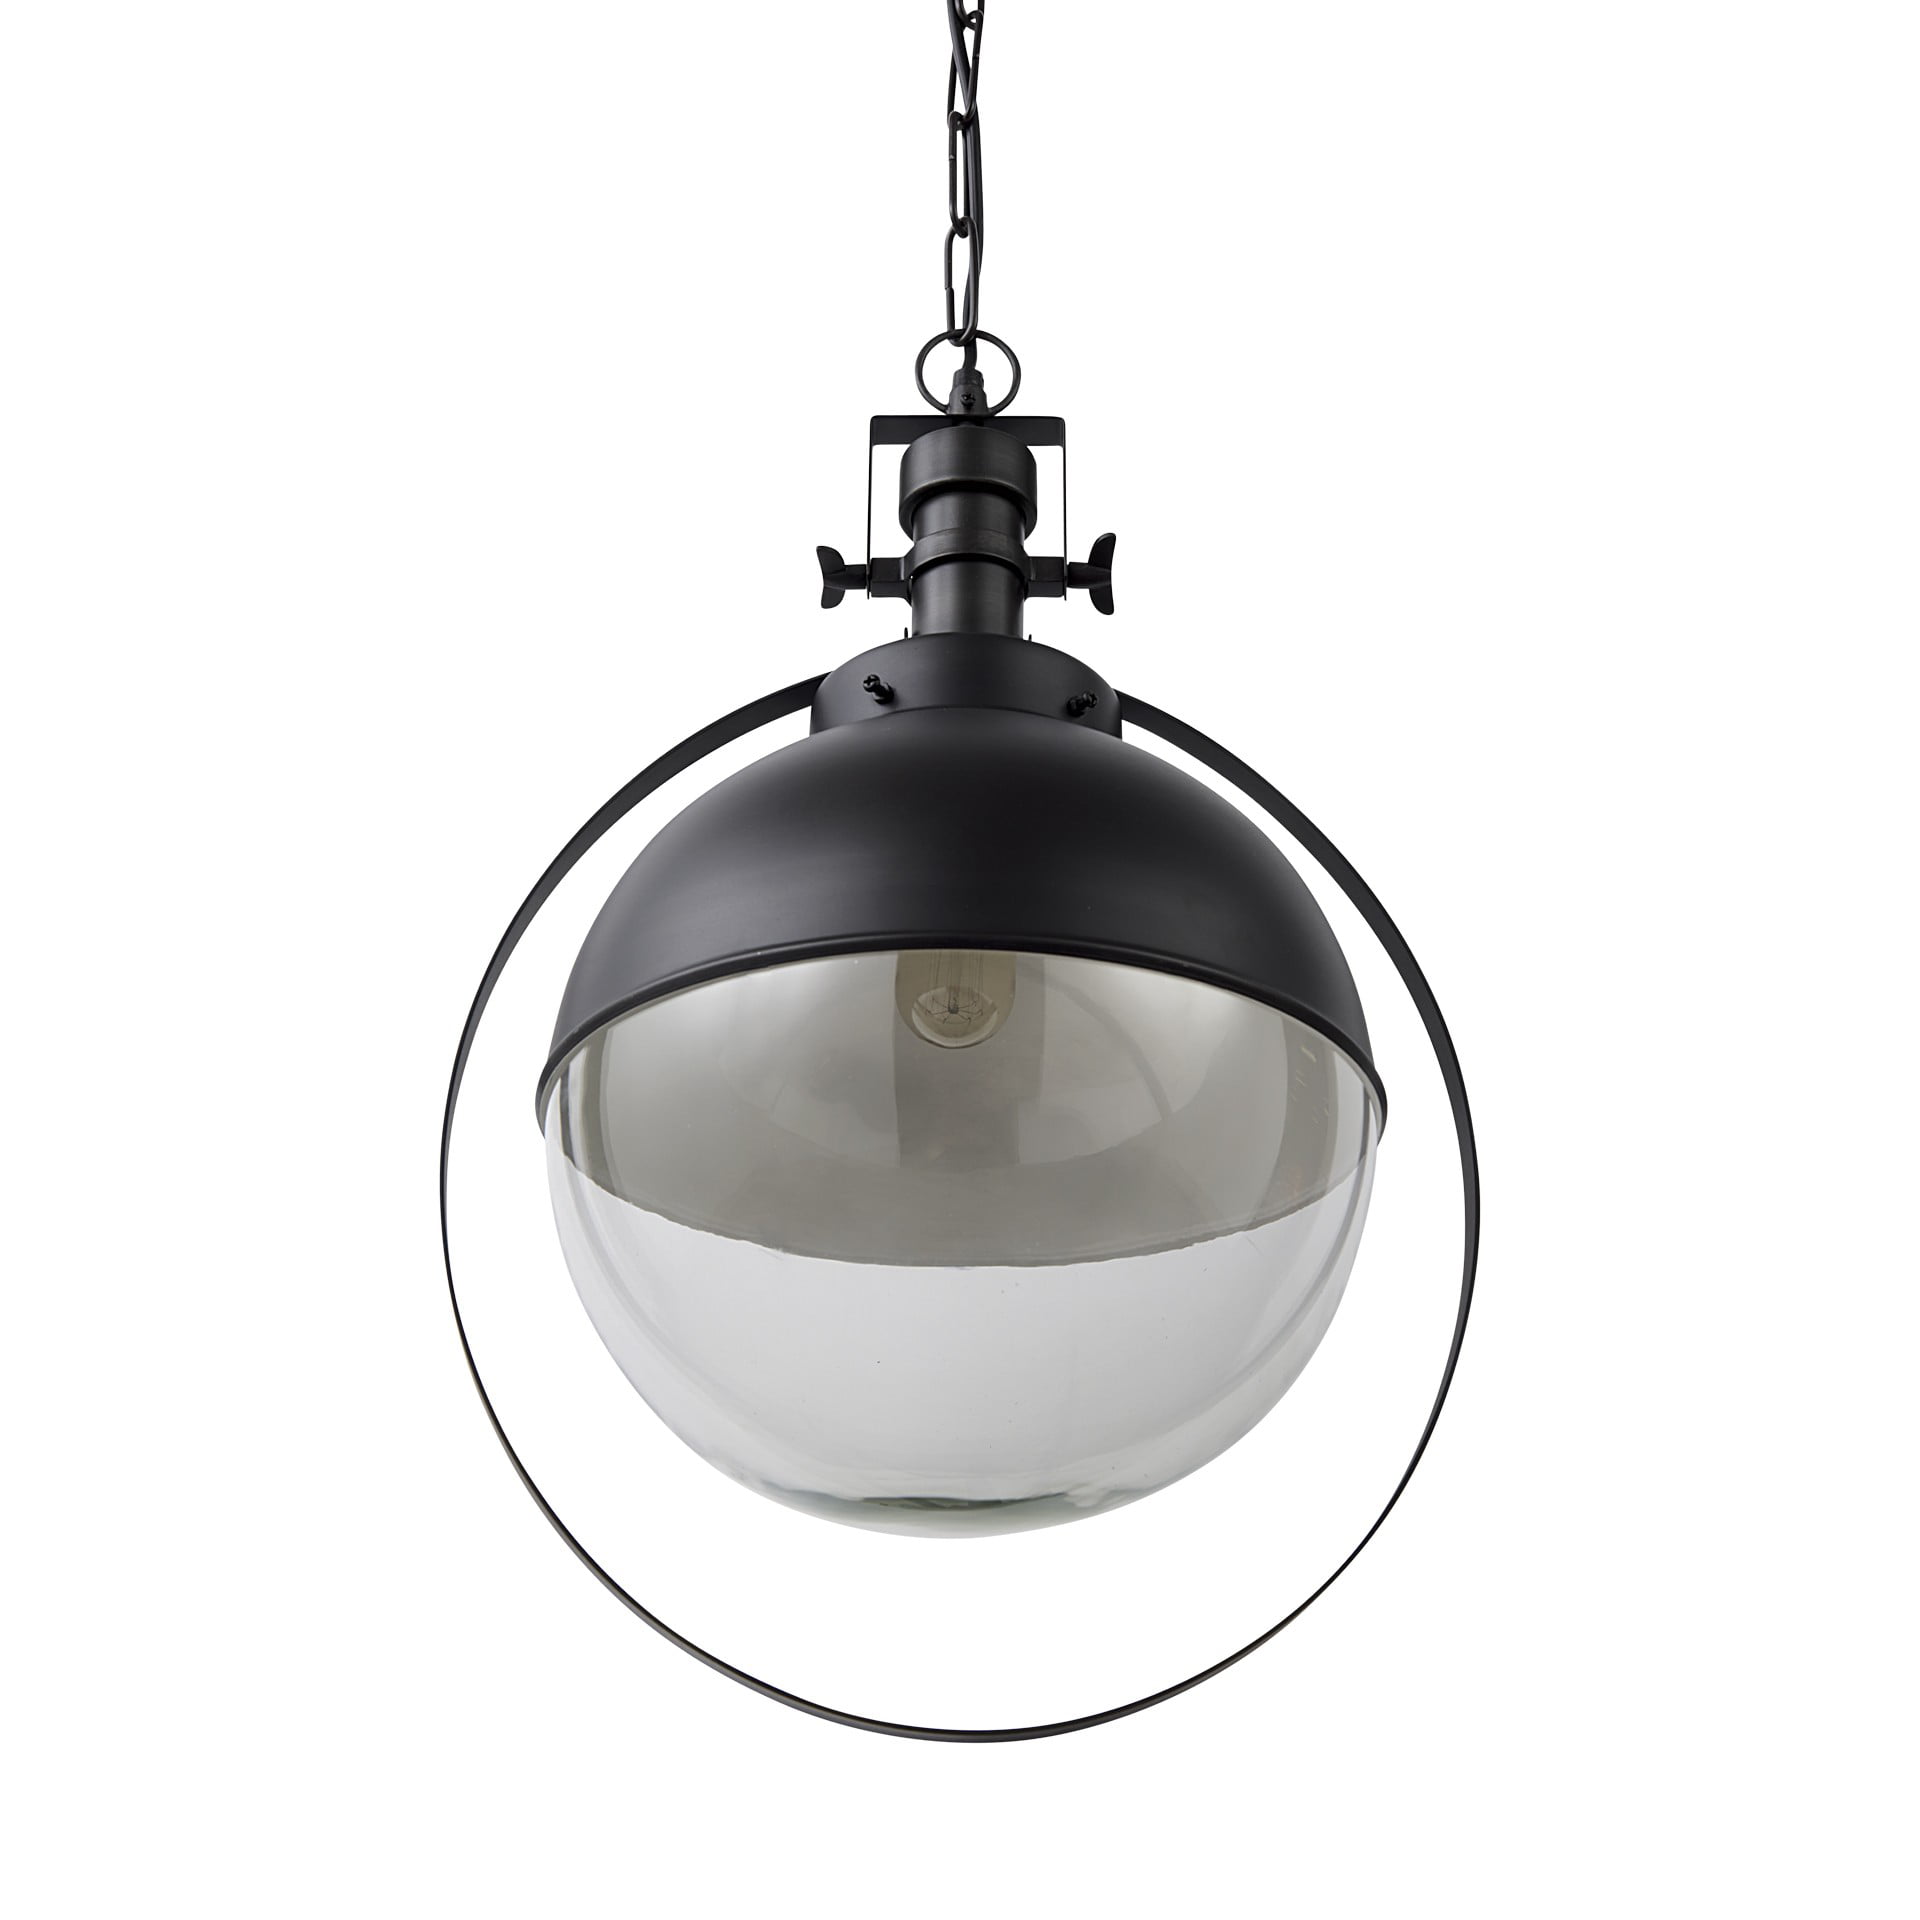 Industrial Pendant Light Ivalue Vintage Barn Pendant Light Fixture with Cage ... 